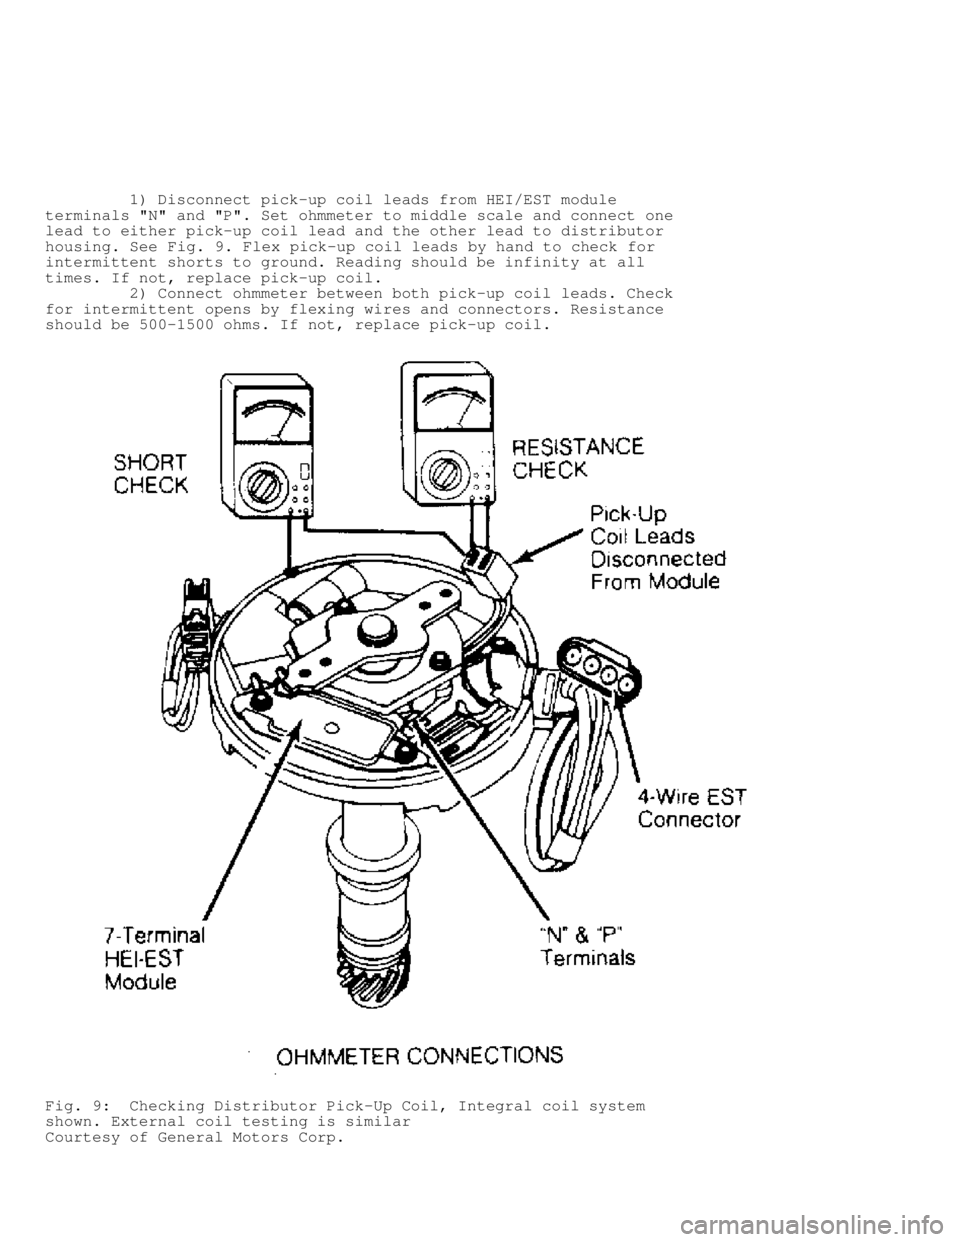 JEEP CHEROKEE 1988  Service Repair Manual          1) Disconnect pick-up coil leads from HEI/EST module
terminals "N" and "P". Set ohmmeter to middle scale and connect one
lead to either pick-up coil lead and the other lead to distributor
hou